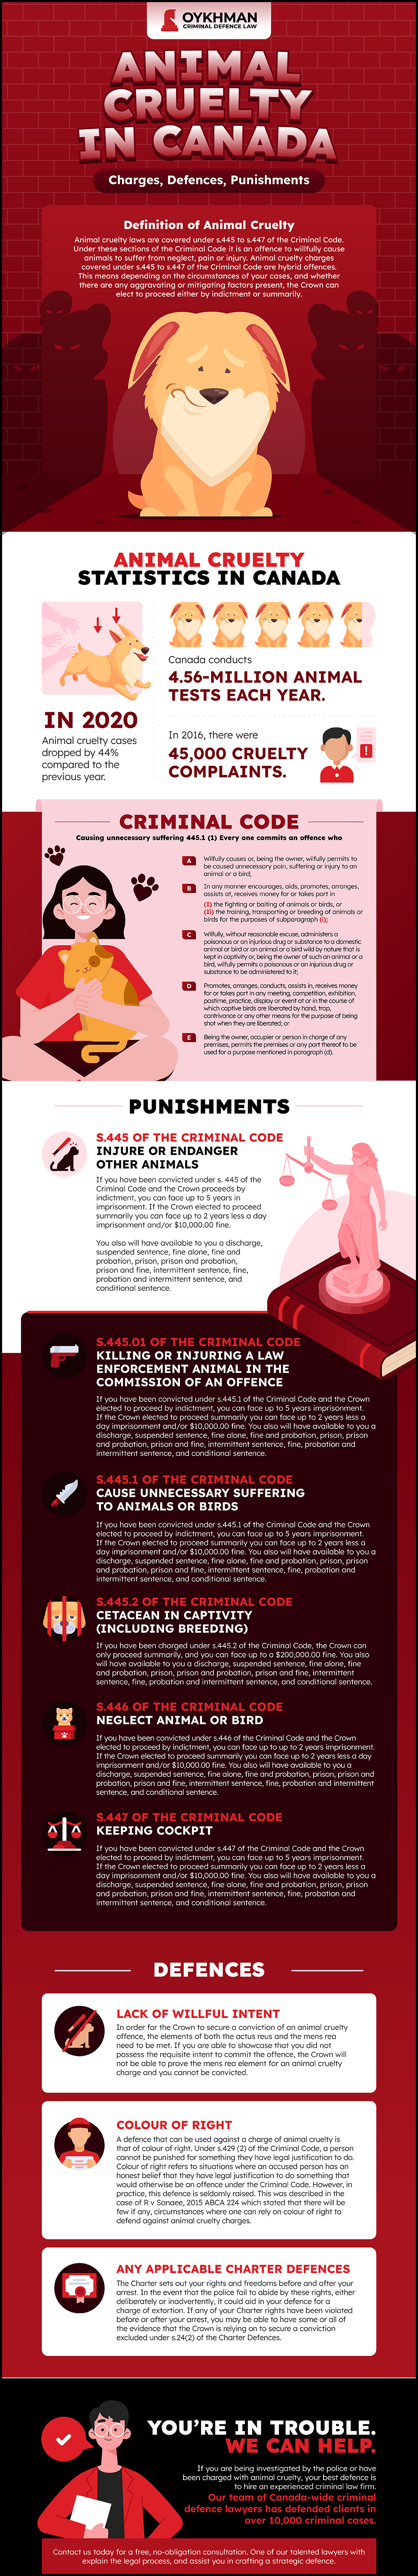 Animal Cruelty (s. 445 - 447) Charges in Canada: Offences, Defences,  Punishments | Oykhman Criminal Defence Law FAQs